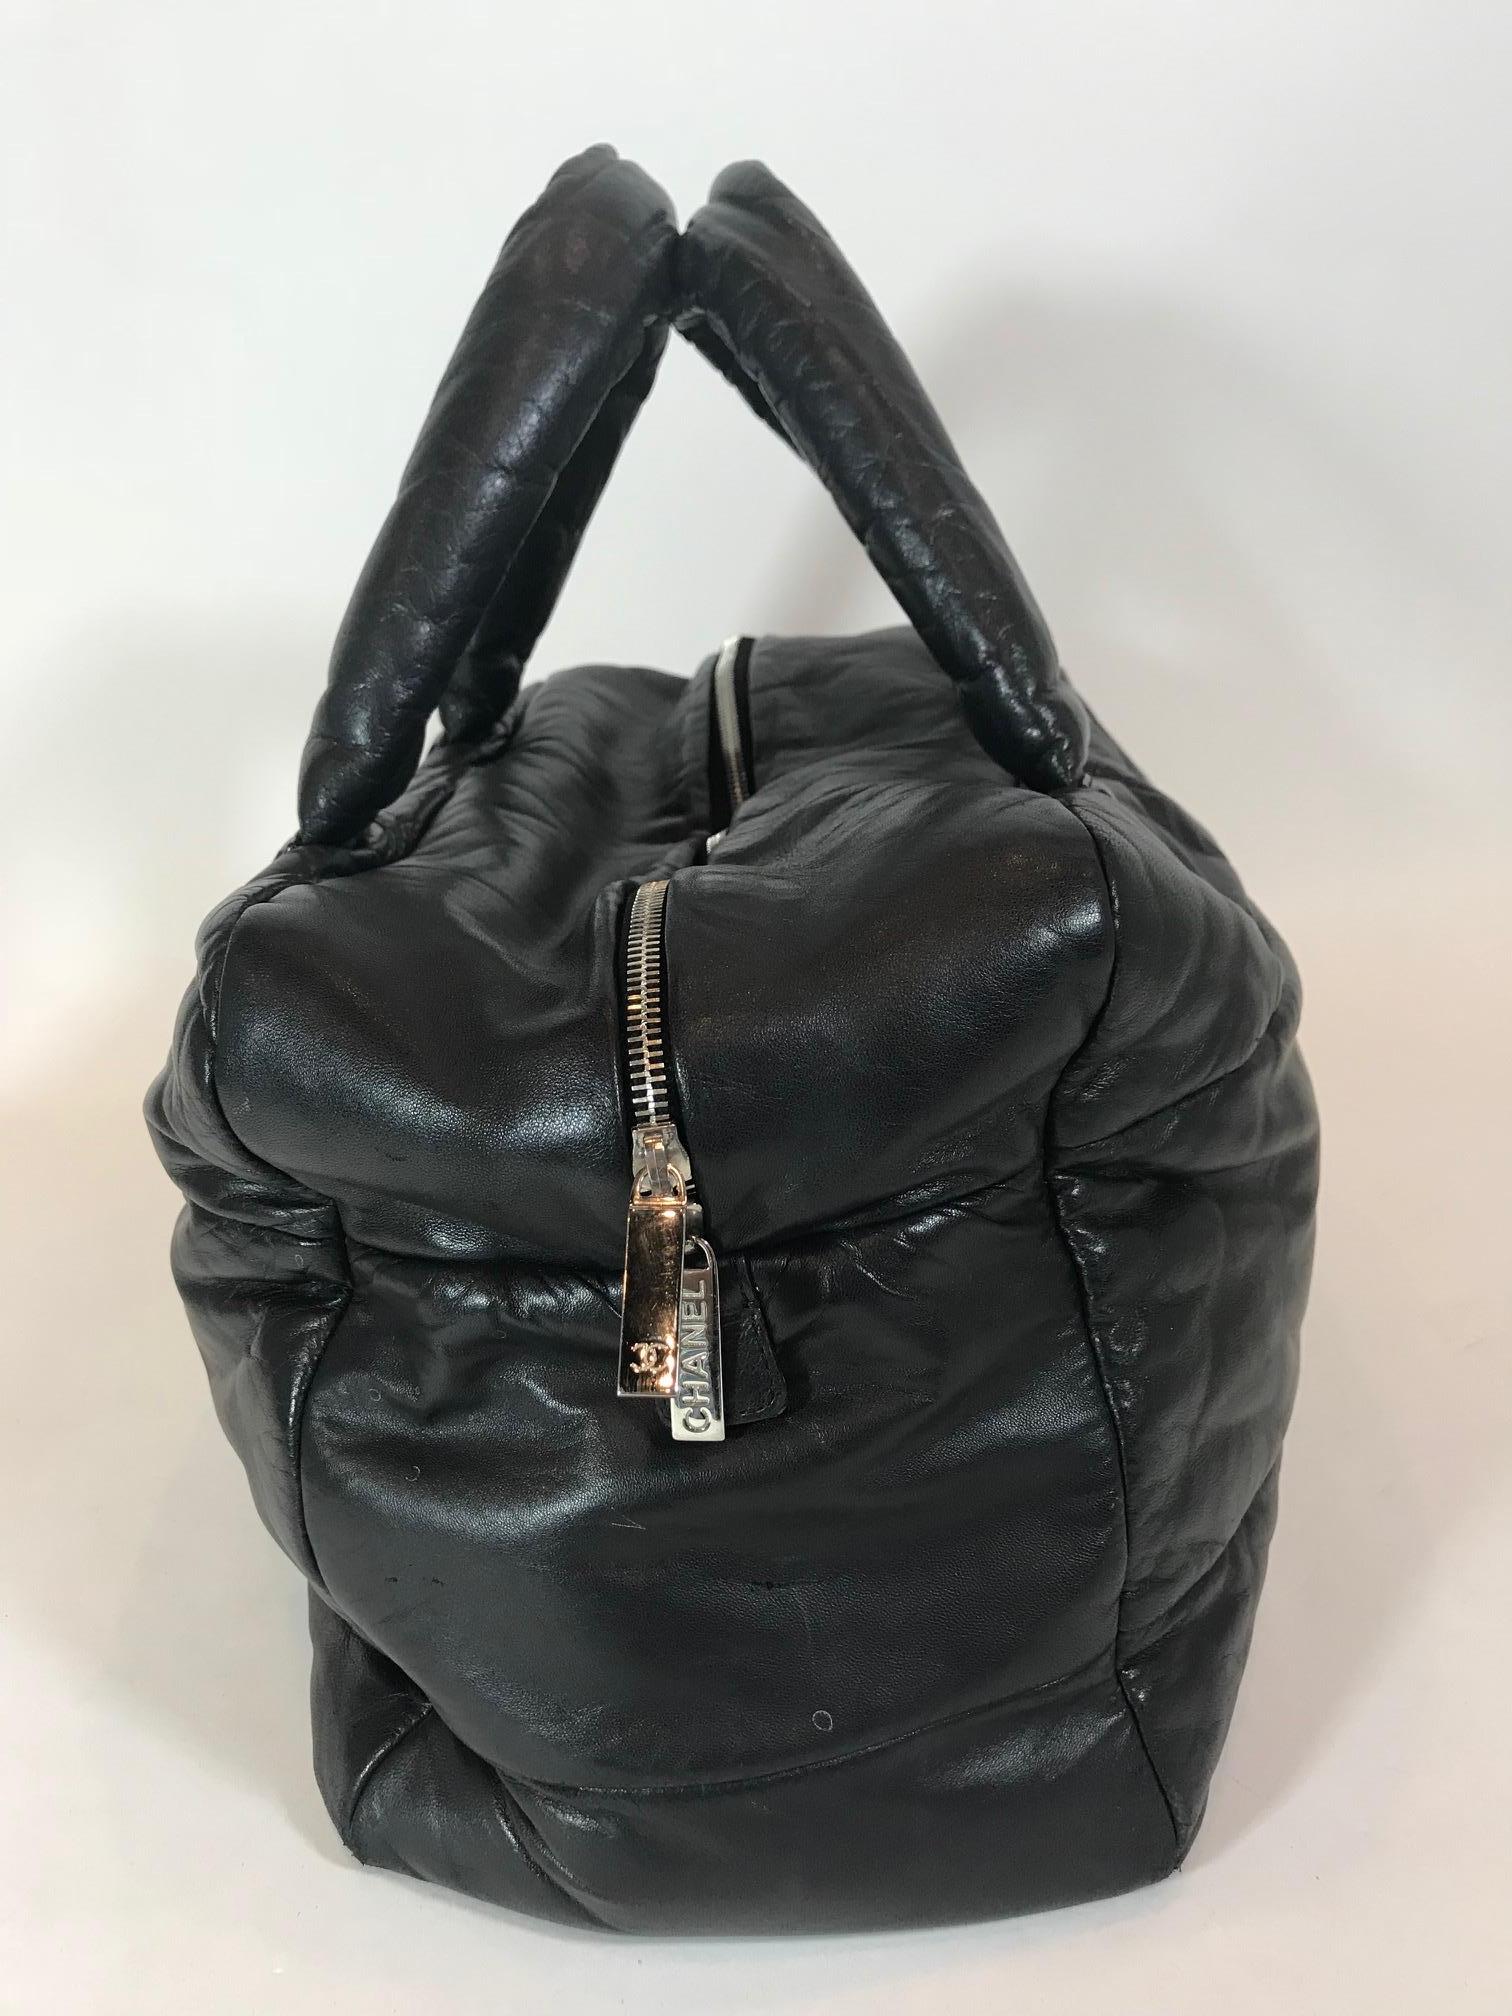  Chanel Large Coco Cocoon Tote In Excellent Condition For Sale In Roslyn, NY